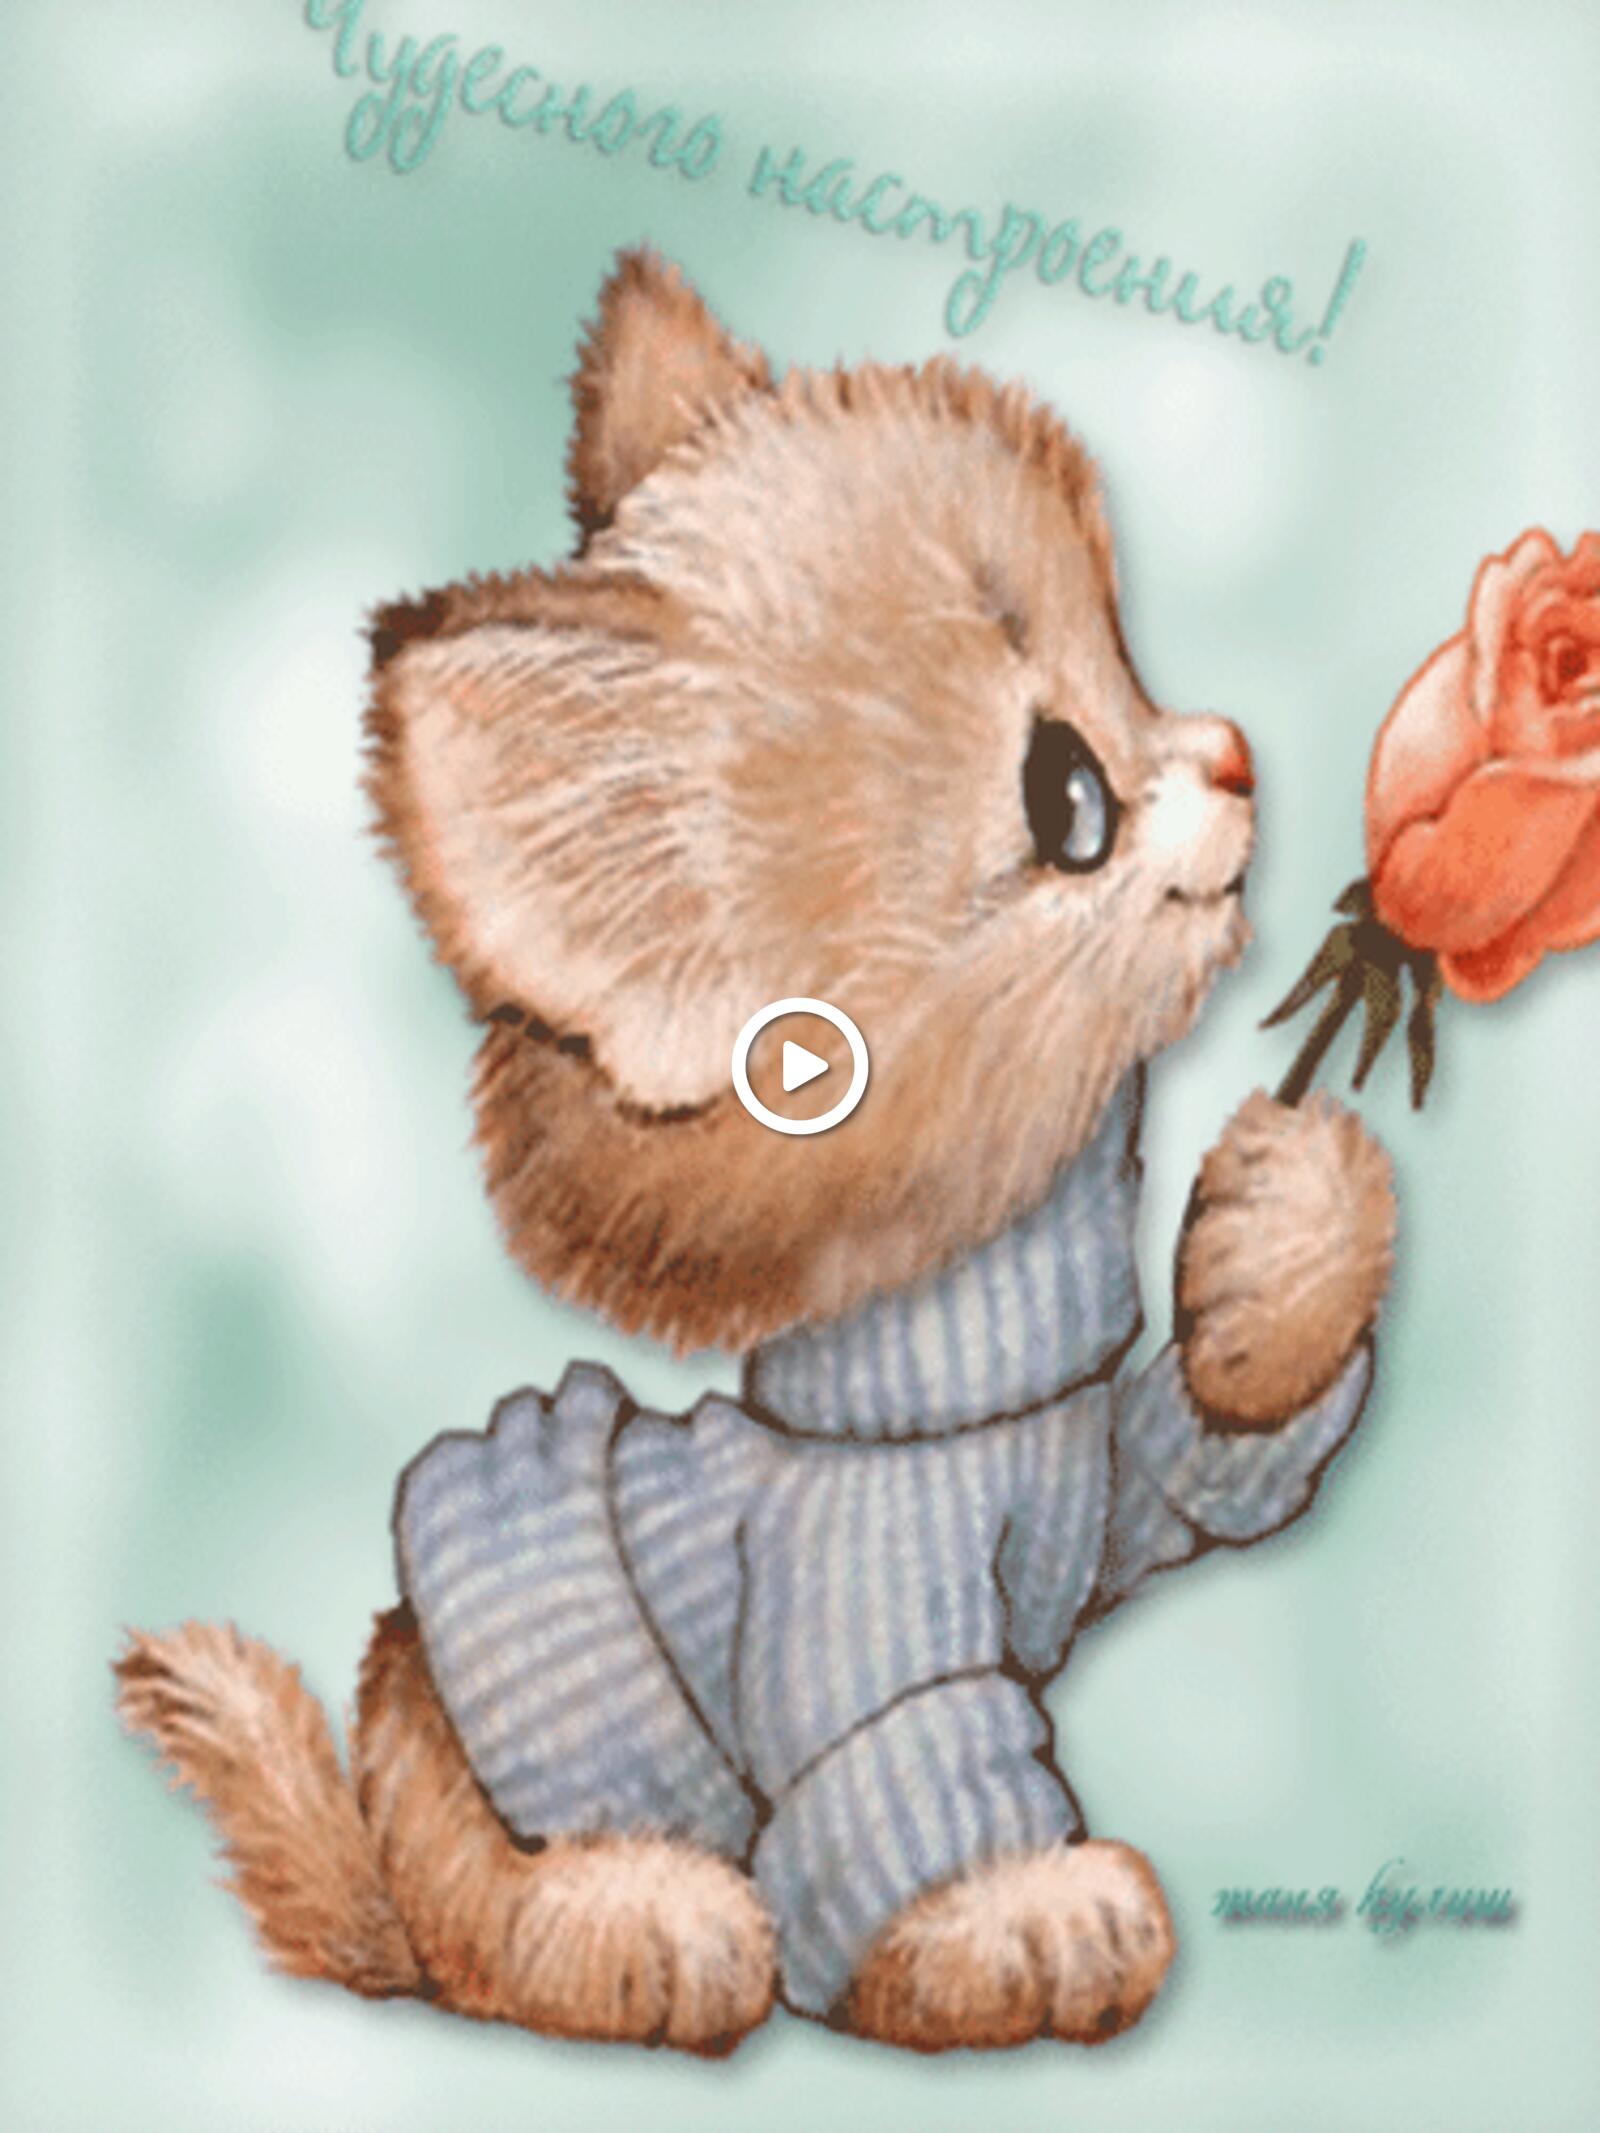 A postcard on the subject of request kitten flower for free